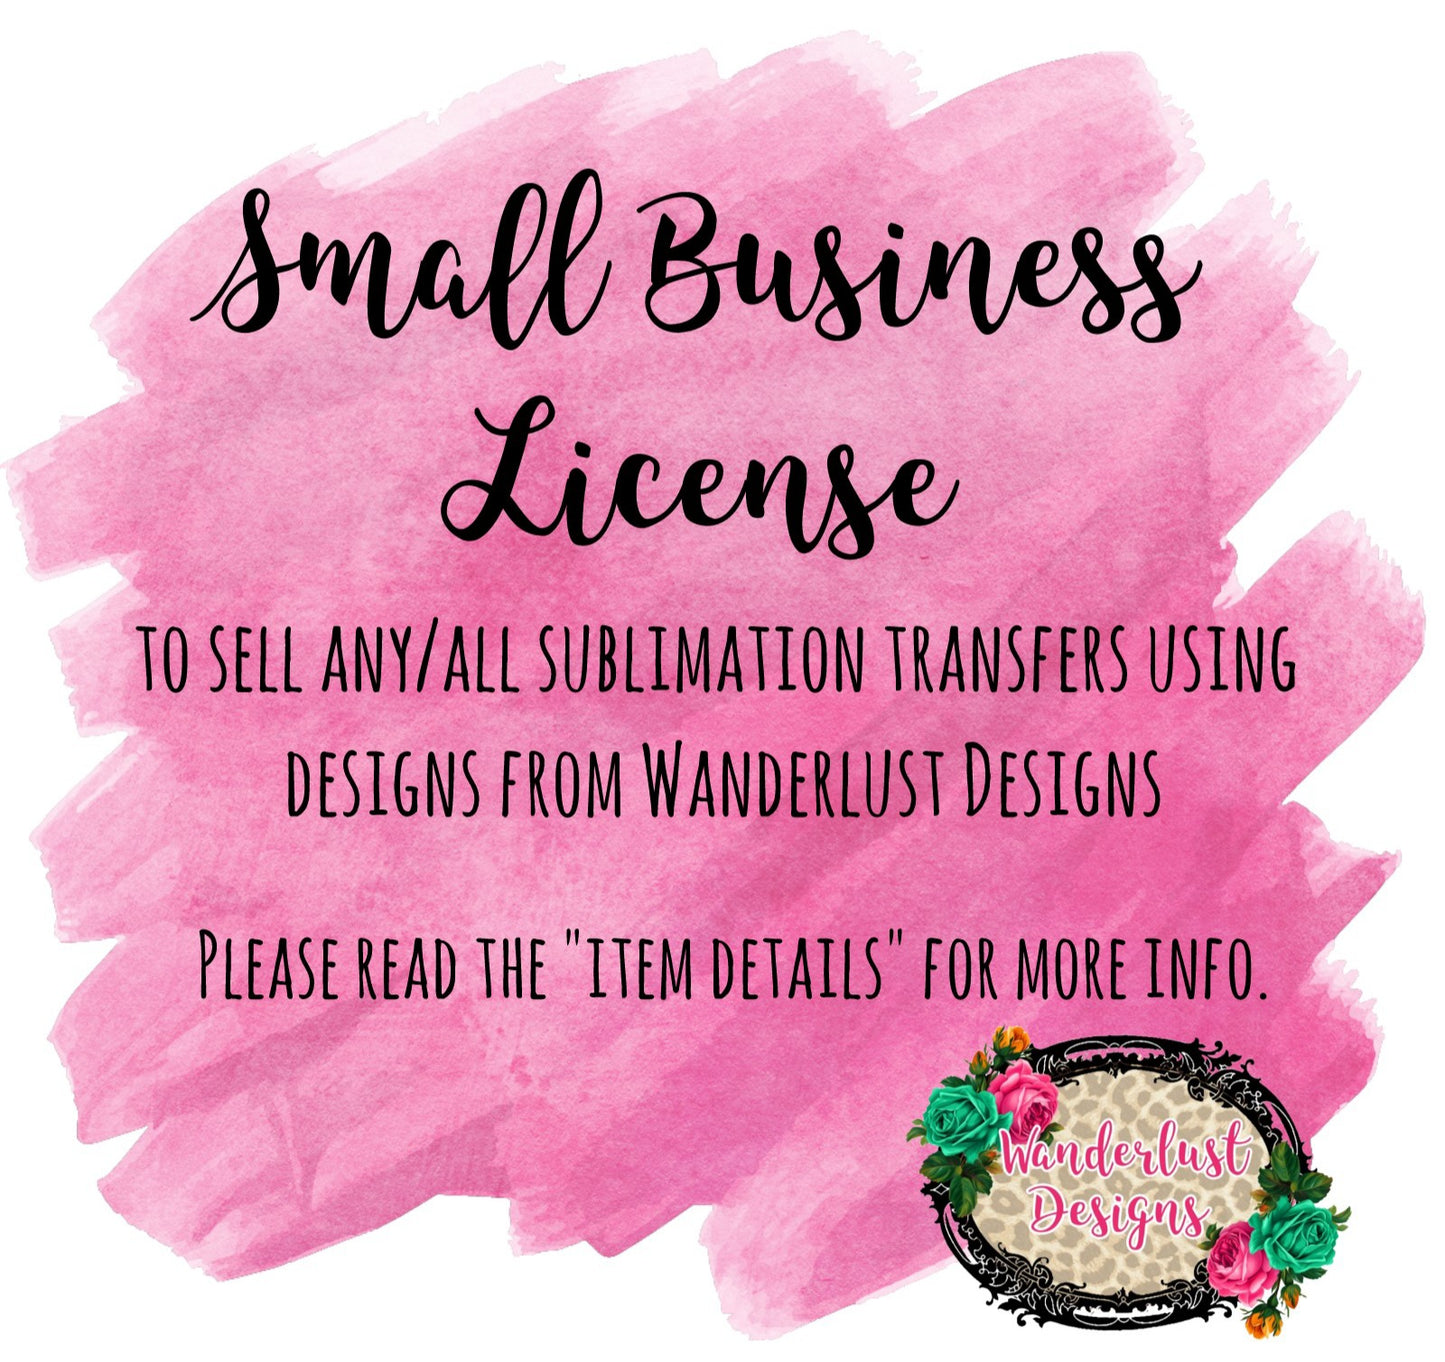 Extended License to Sell Transfers